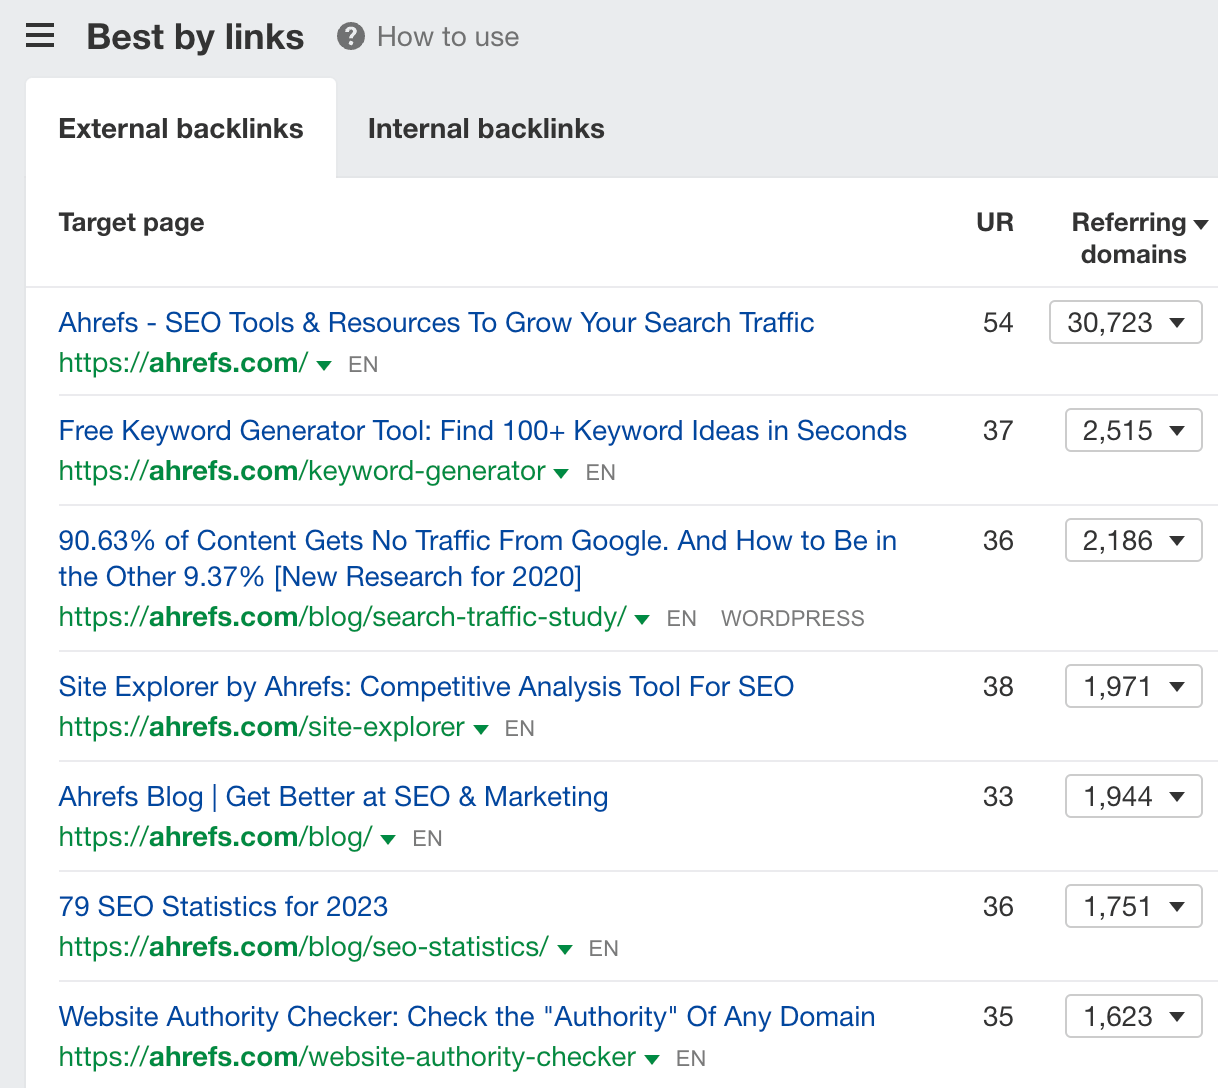 The most linked pages on our site, via Ahrefs' Site Explorer